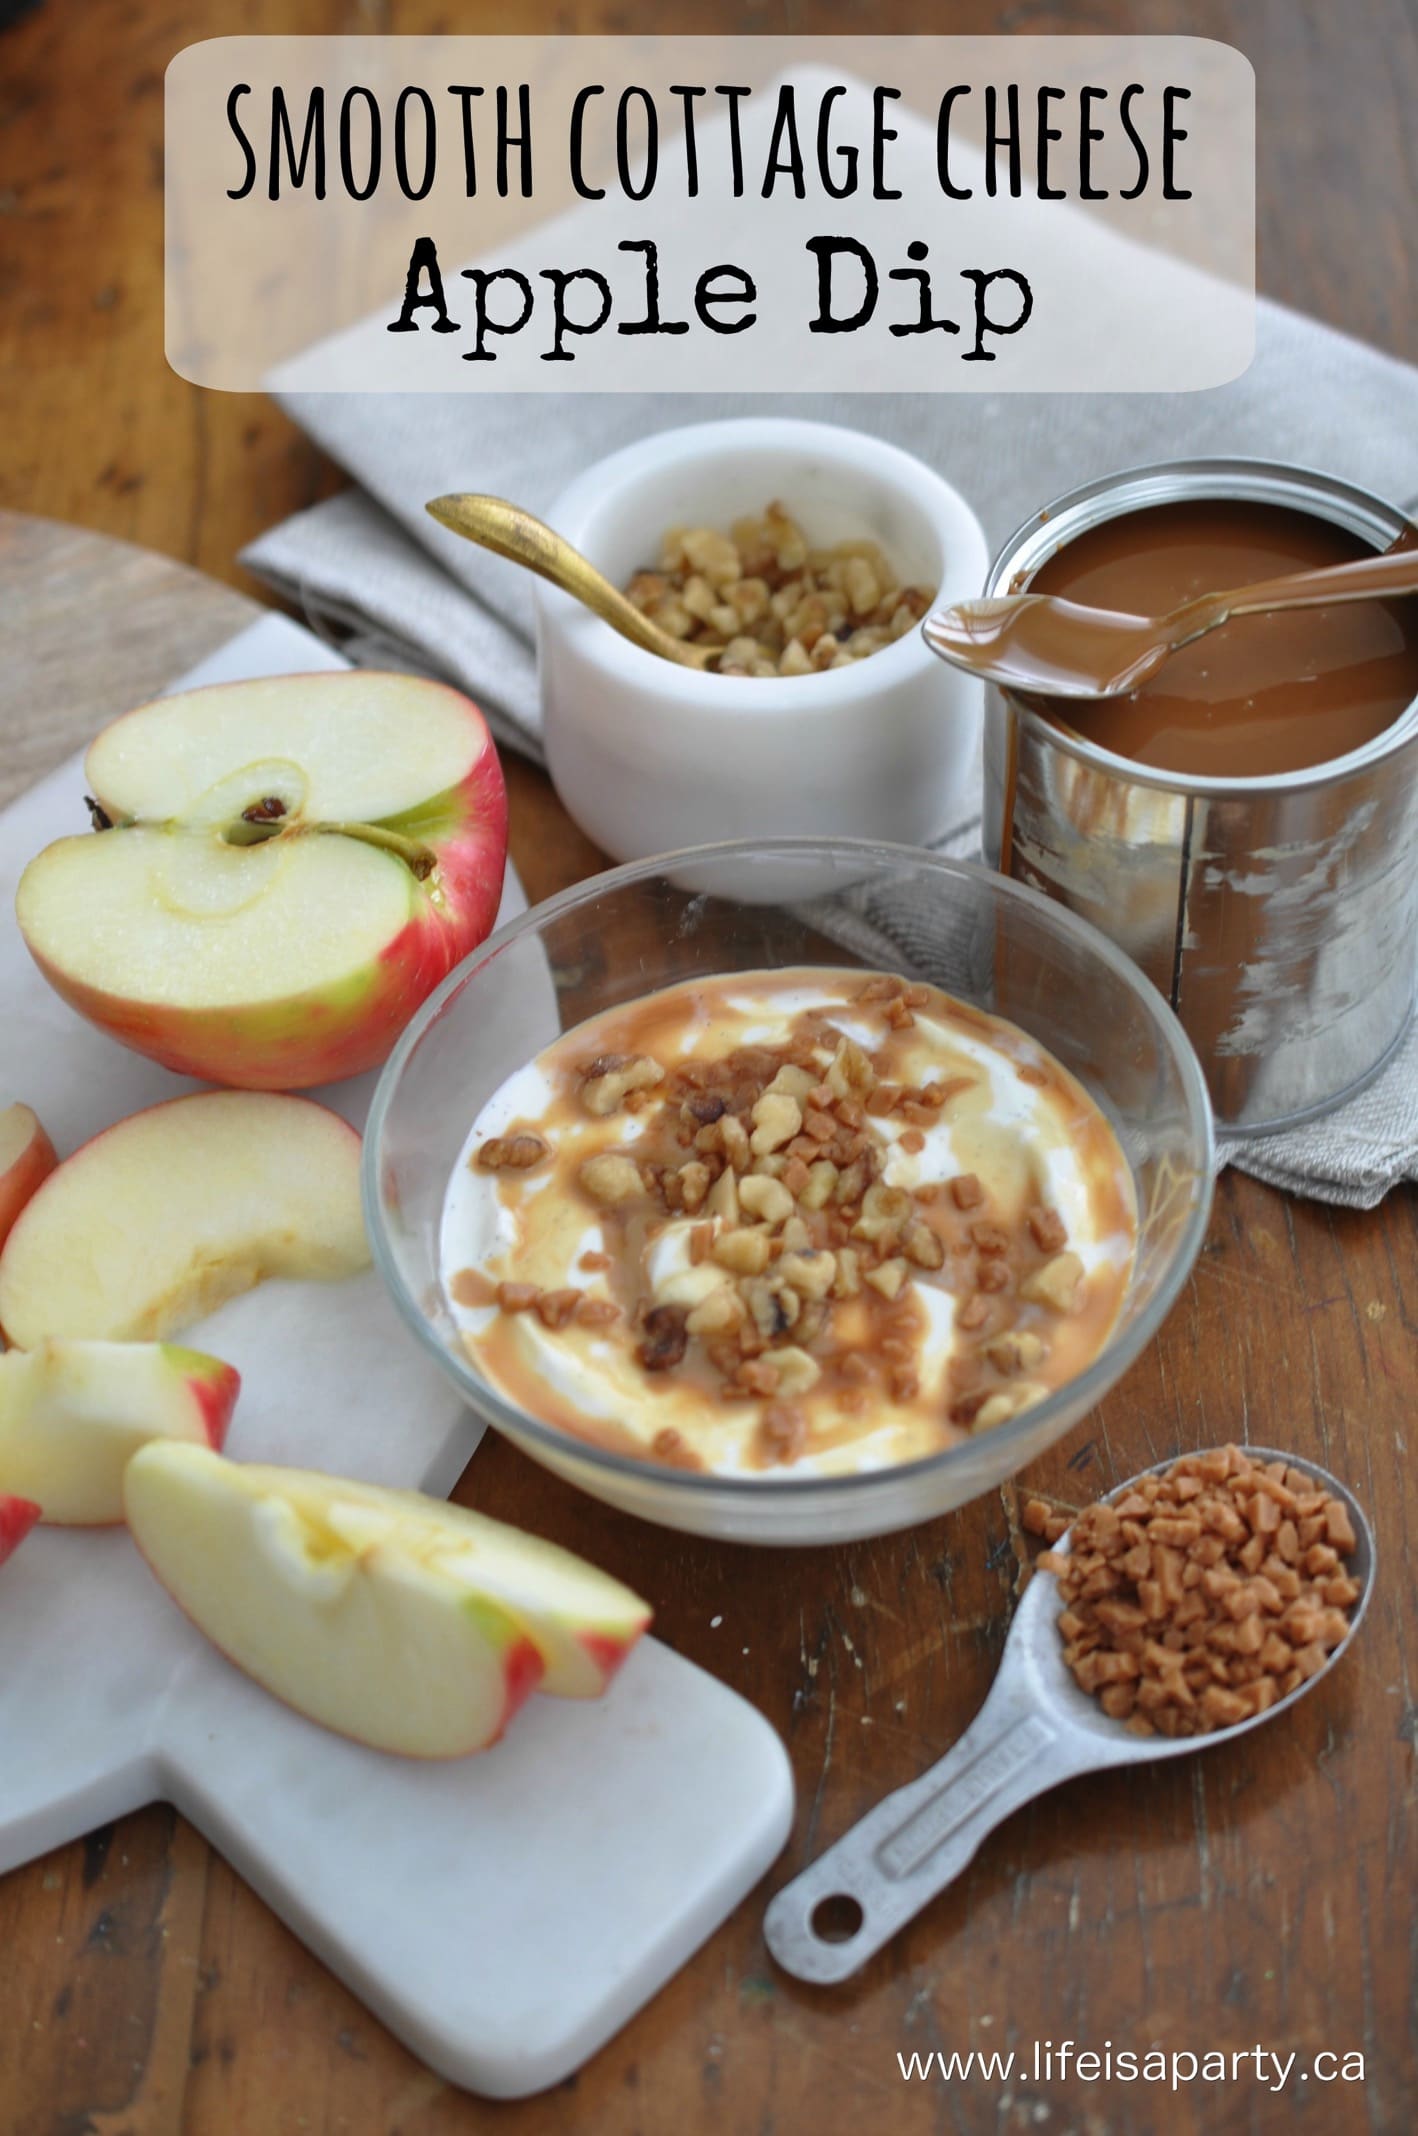 Smooth Cottage Cheese Apple Dip